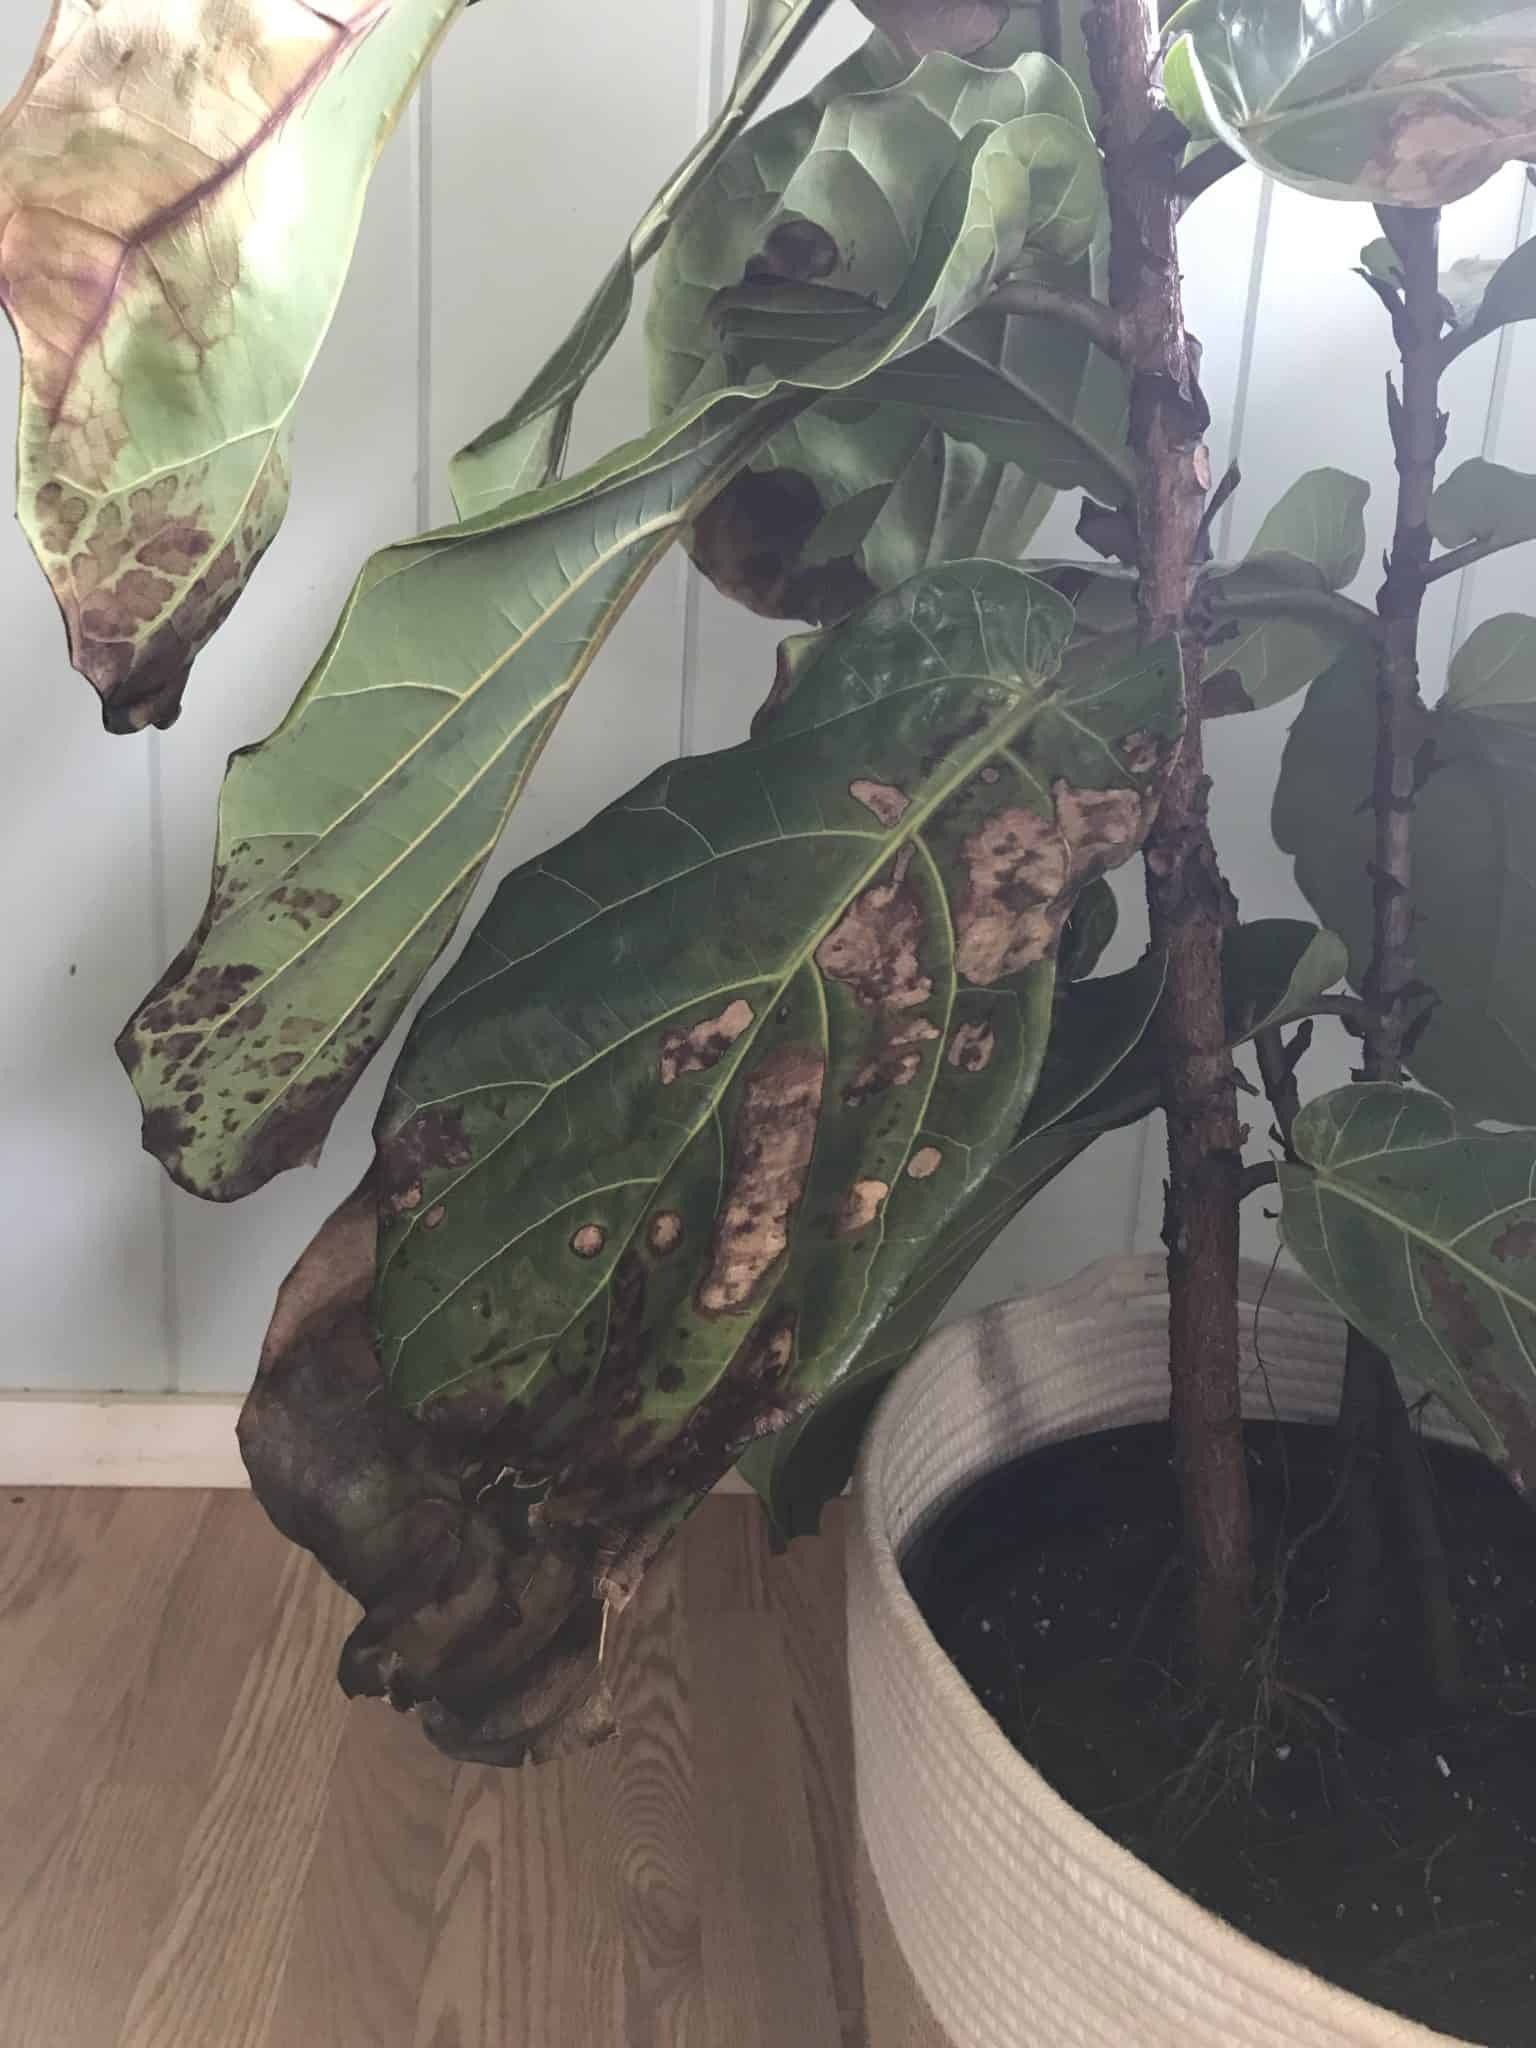 Leaves turning brown and falling off The Fiddle Leaf Fig